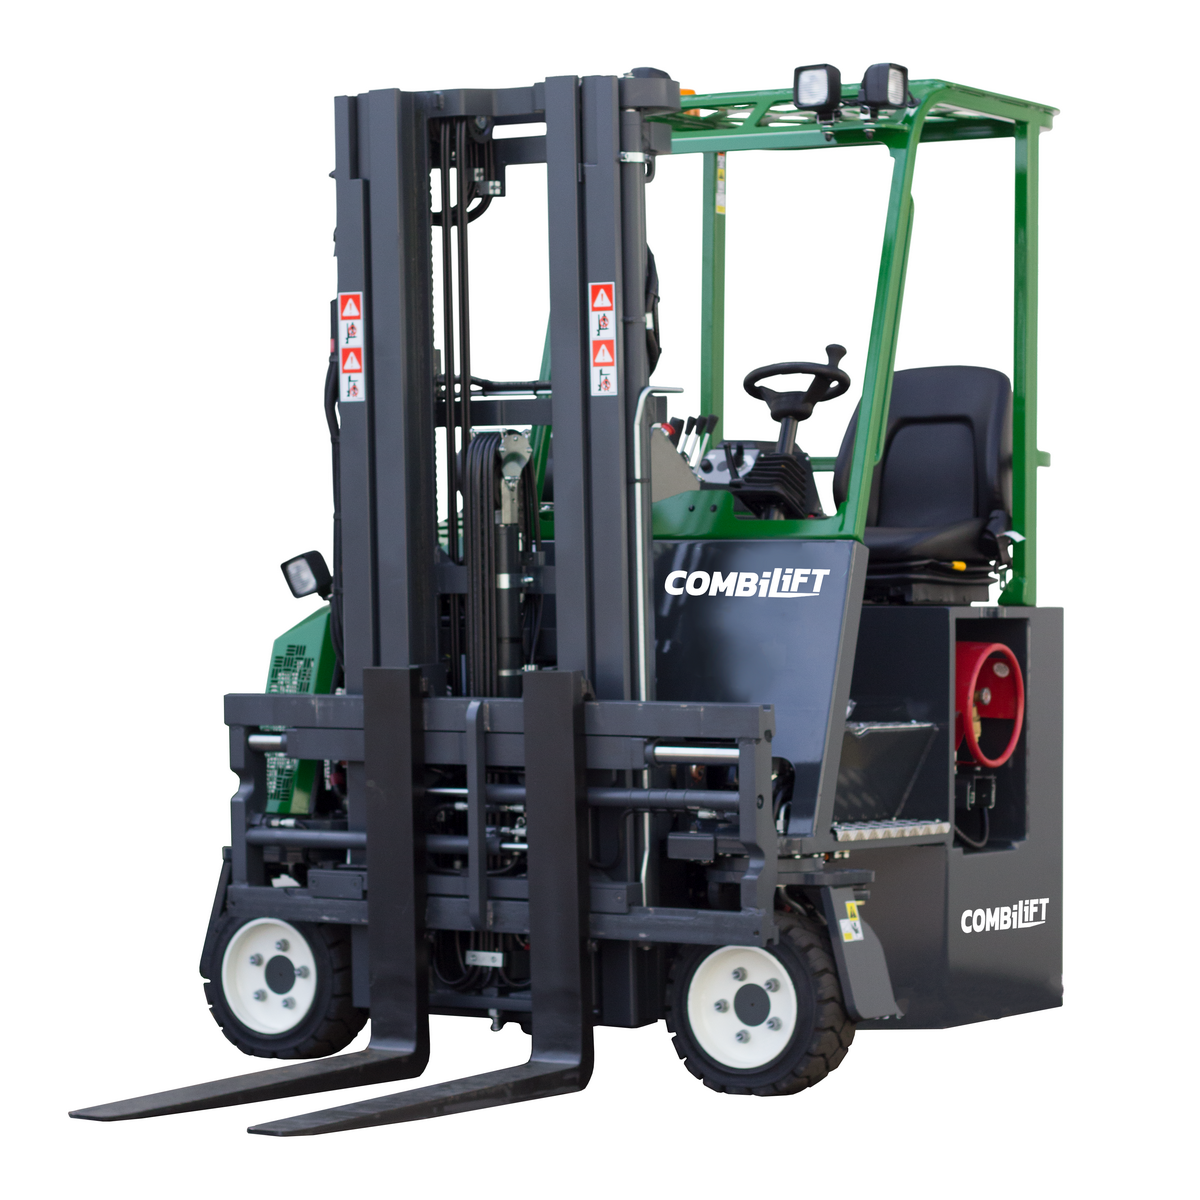 Combilift-–-COMBI-CB-–-Multi-Directional-counterbalance-forklift-–-handling-long-loads-Cut-Out-CB-LPG